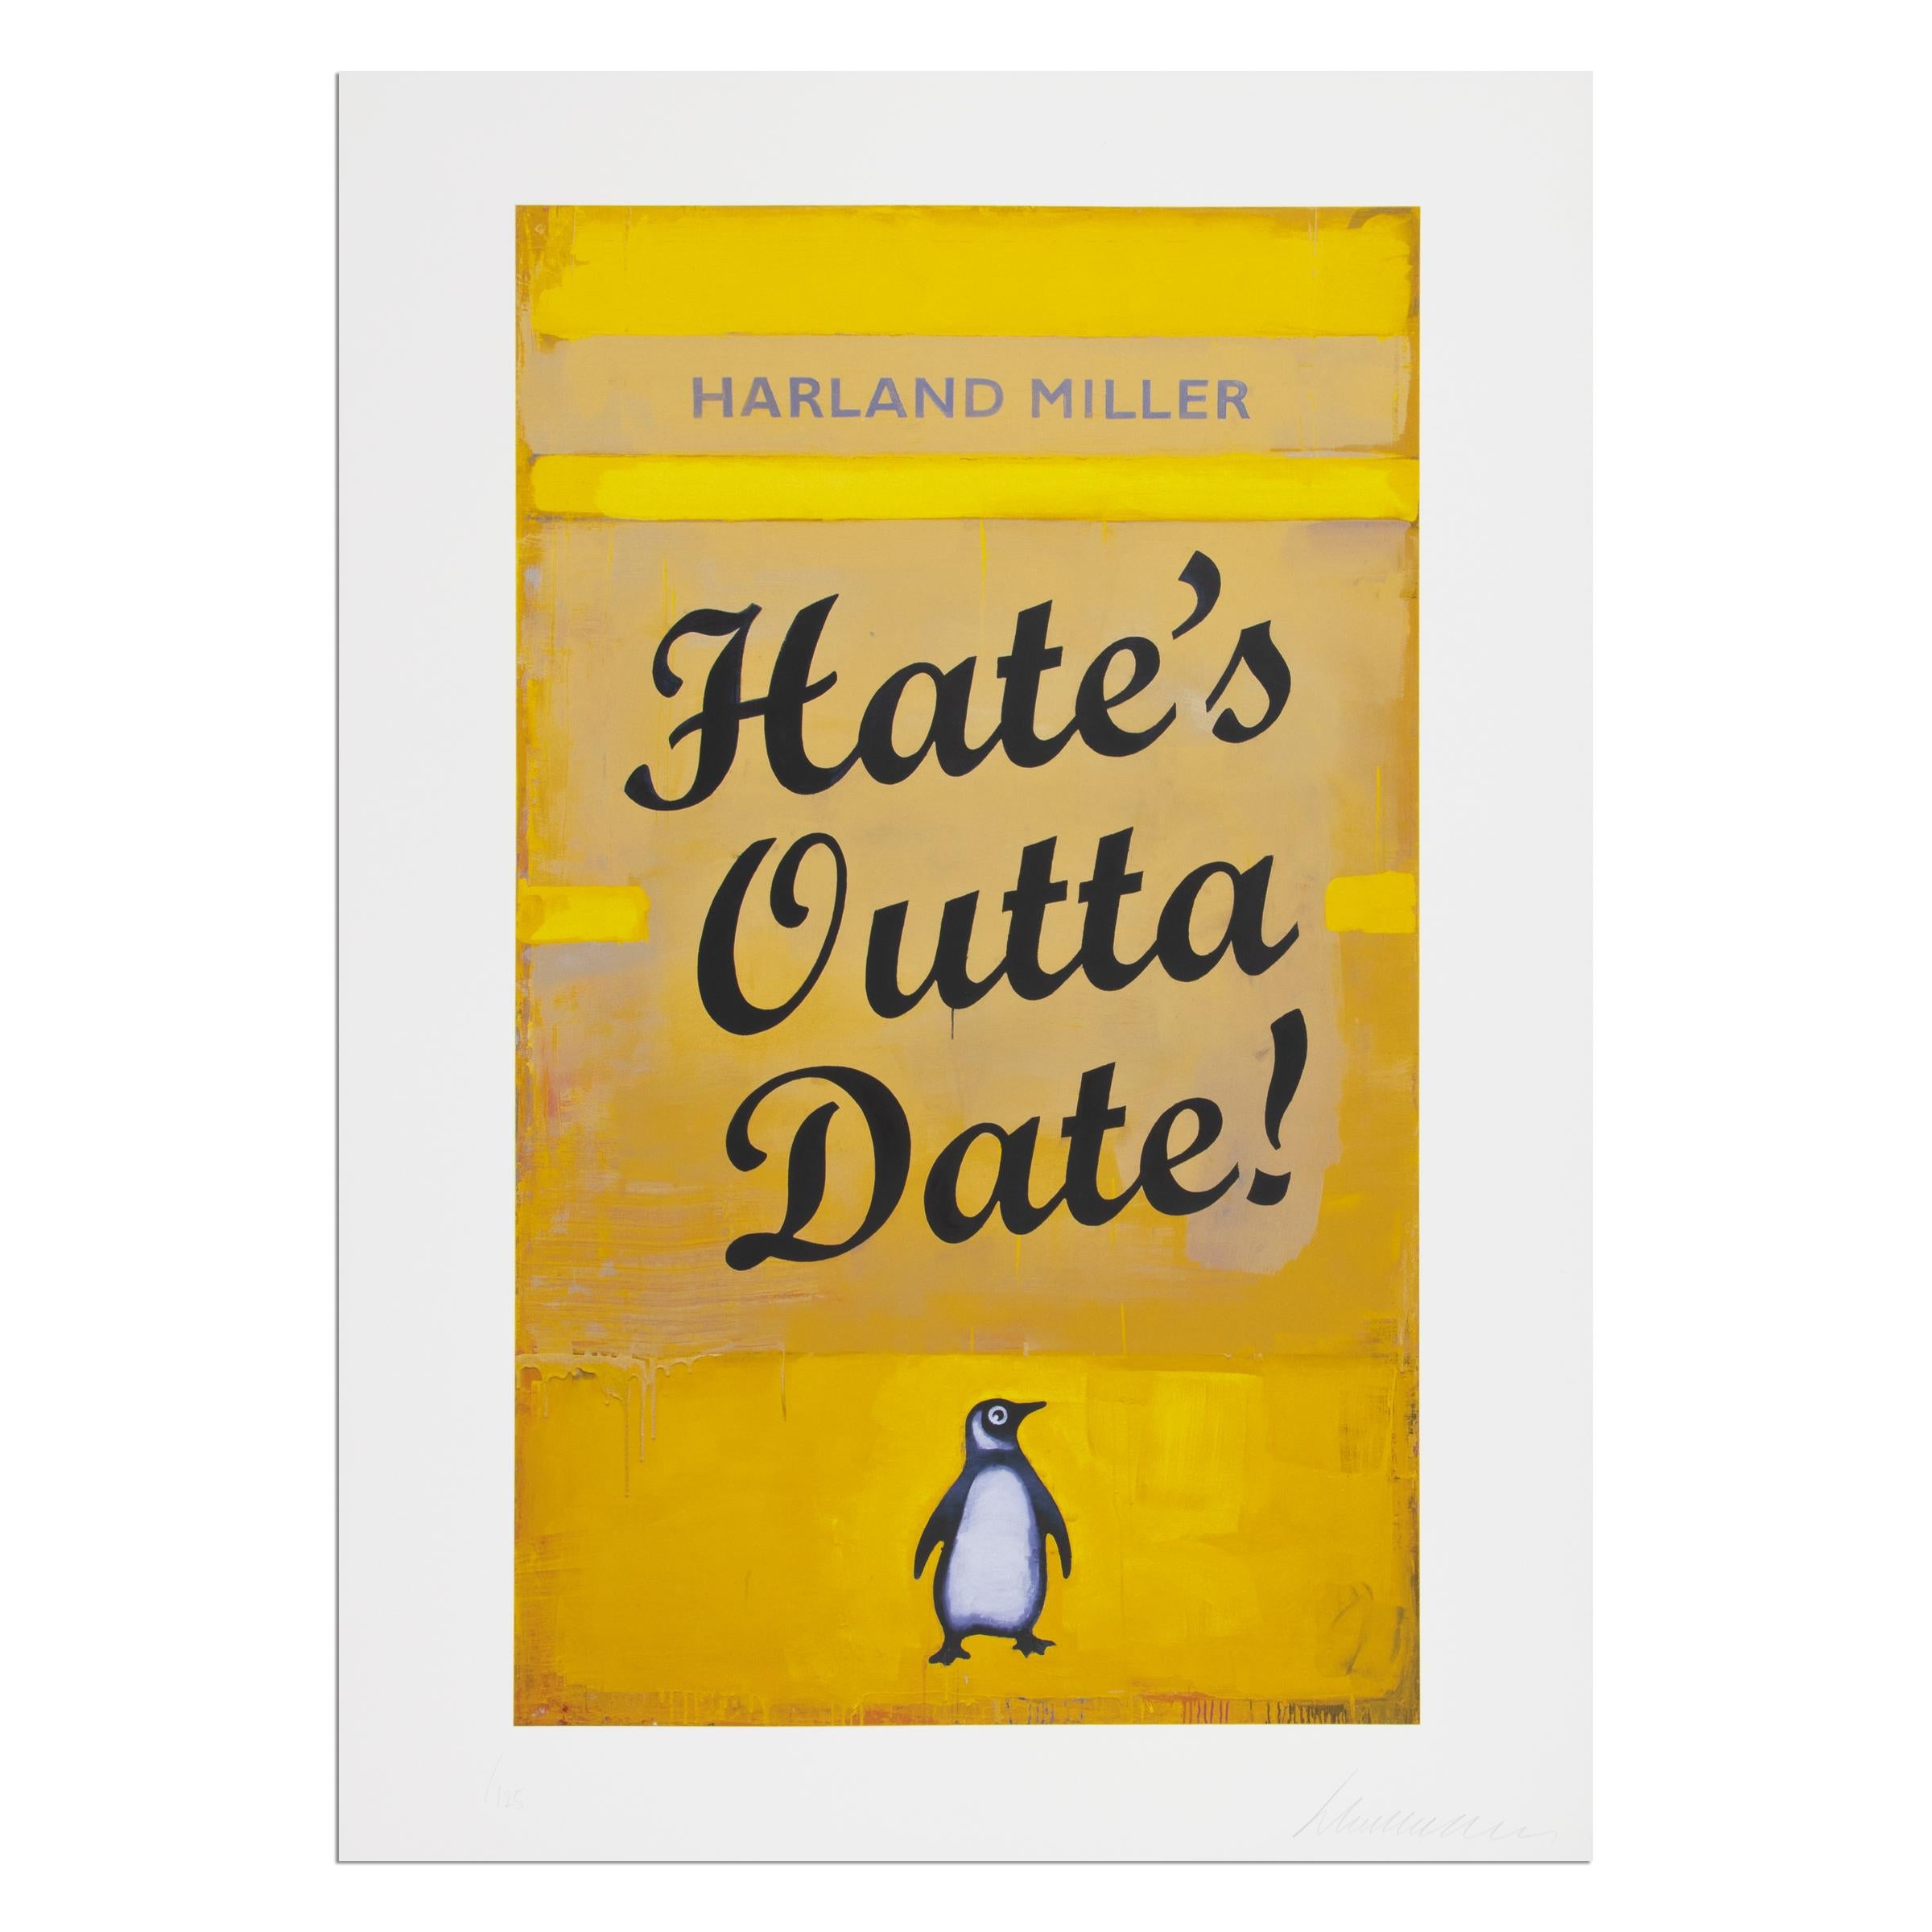 Harland Miller (British, b. 1964)
Hate’s Outta Date (Yellow), 2022
Medium: Screenprint on paper
Dimensions: 100 × 70 cm (39 2/5 × 27 3/5 in)
Edition of 125: Hand-signed and numbered
Publisher: White Cube, London
Condition: Mint